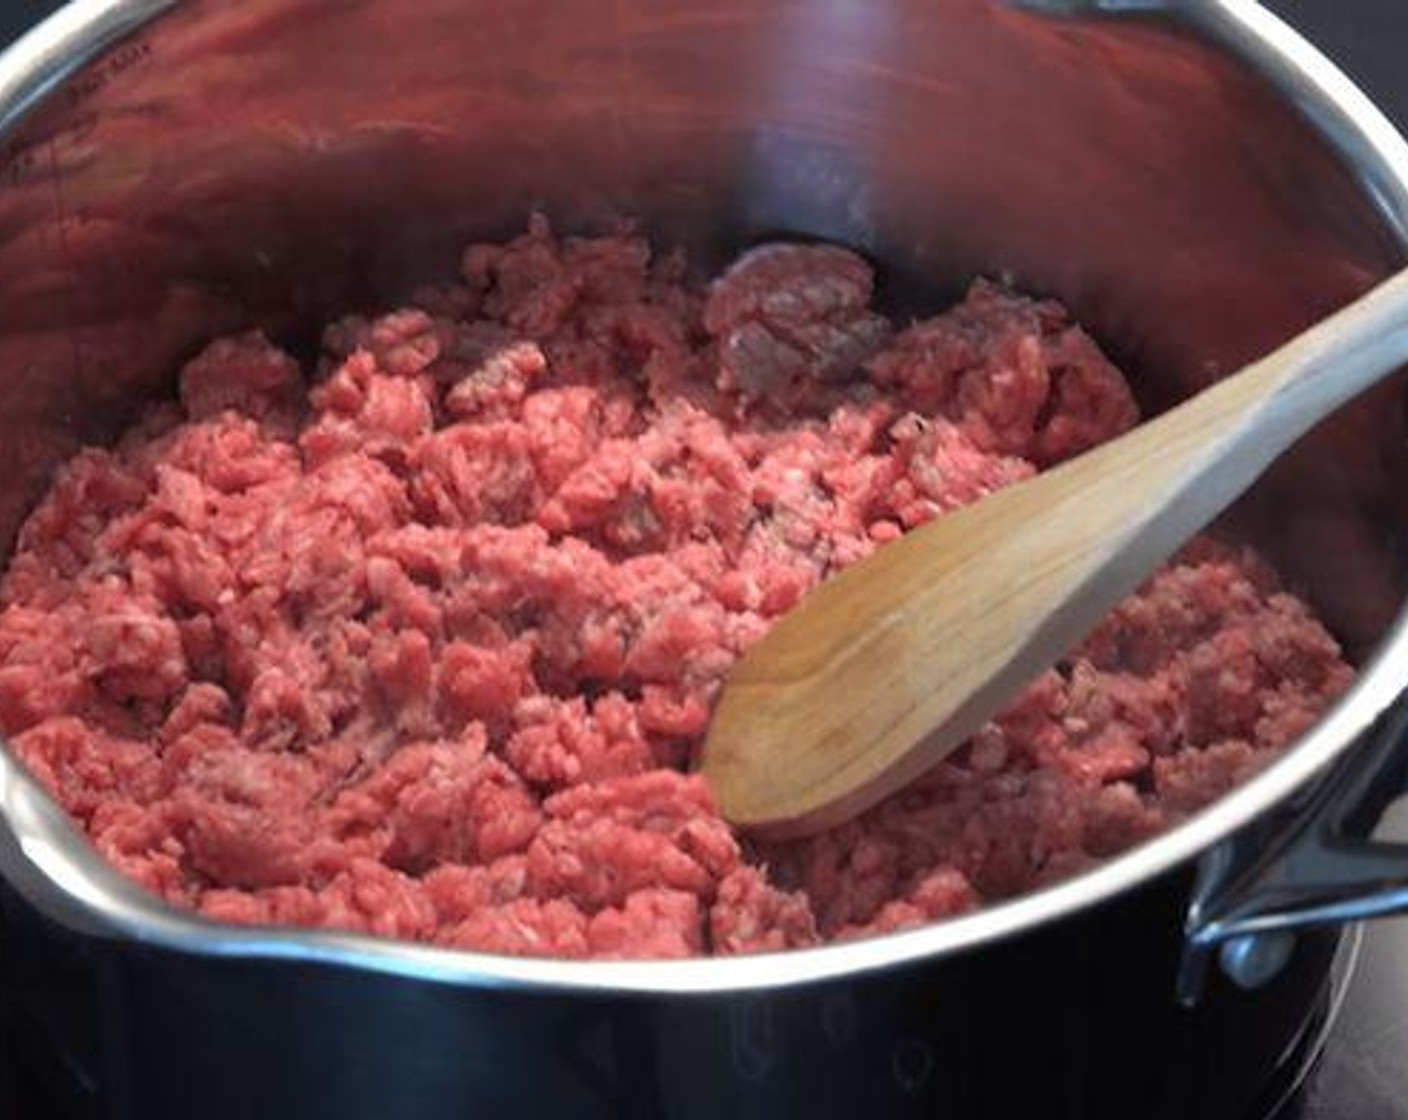 step 2 In a saucepan add Olive Oil (1 Tbsp) and Ground Beef (1.1 lb). Using a wooden spoon break apart the minced beef and cook until brown.